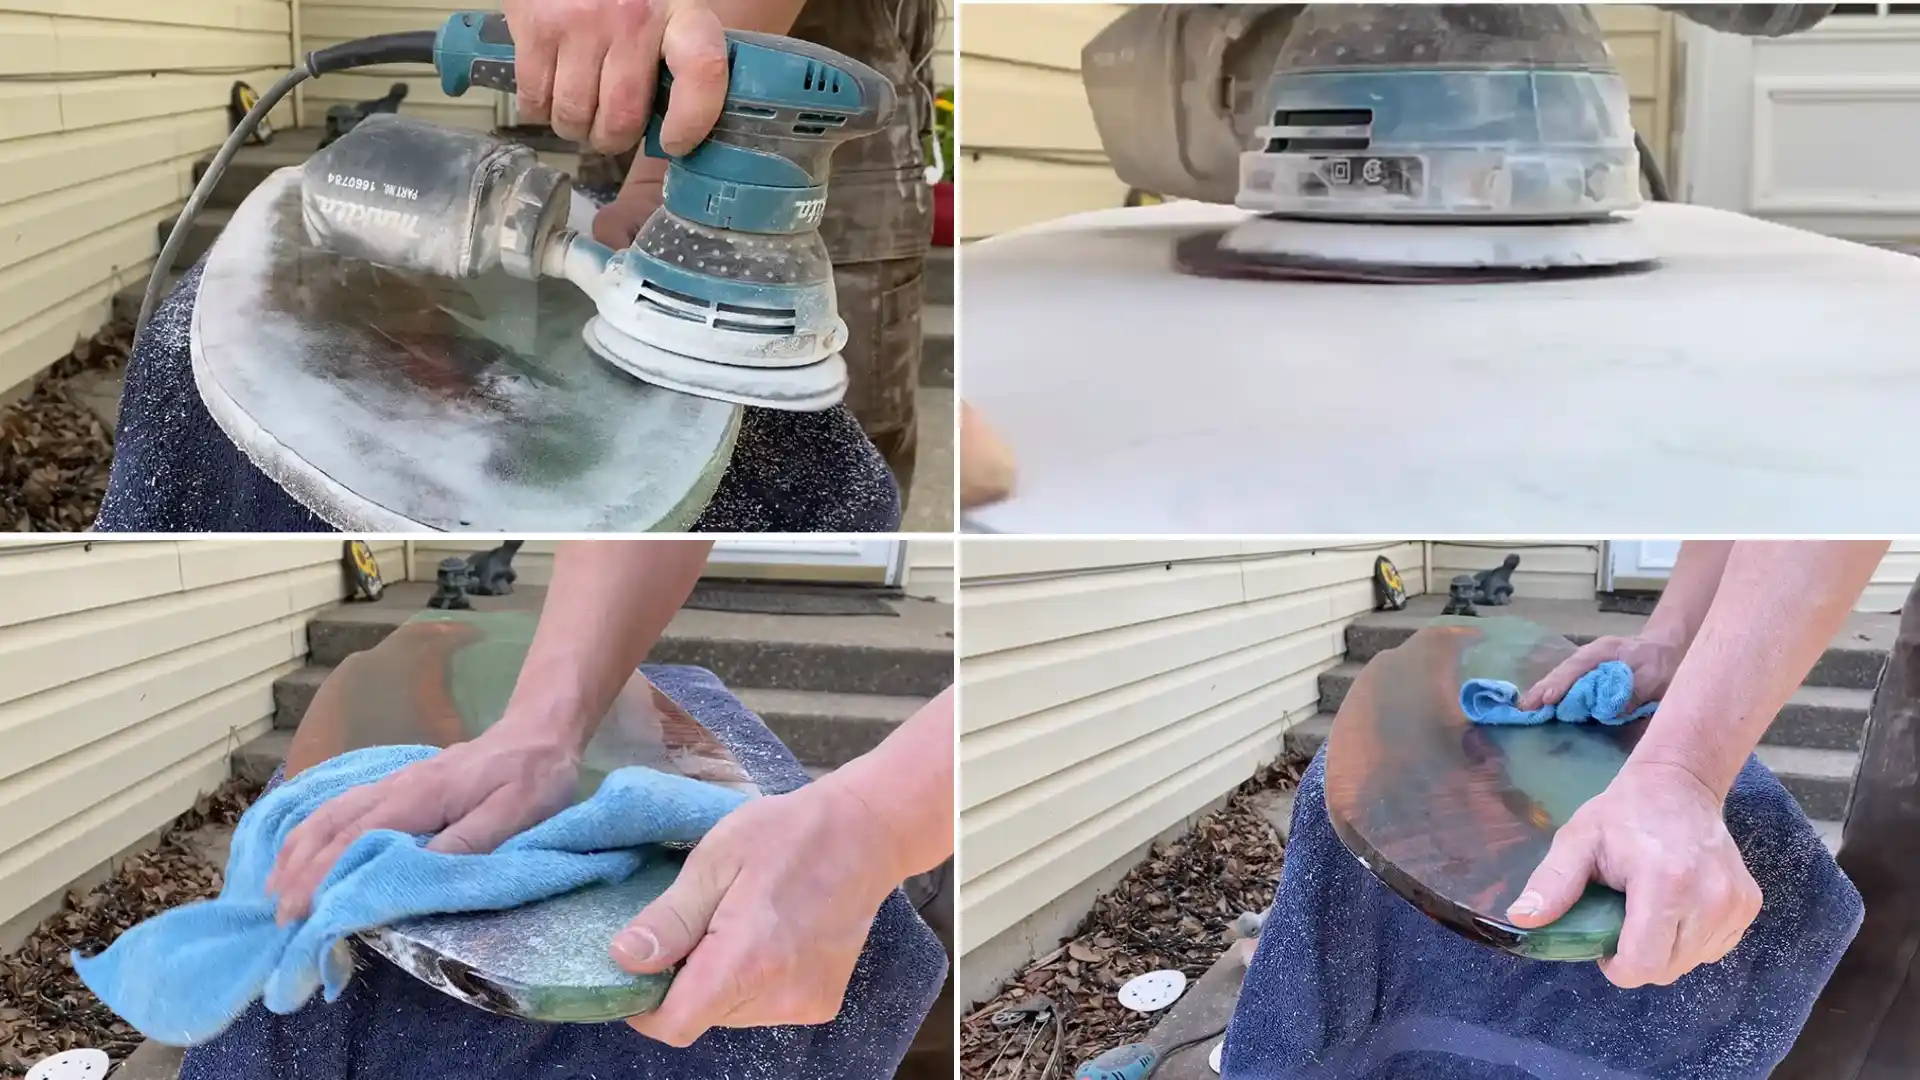 Smooth the surface by sanding up to 400 grits using a random orbital sander to remove imperfections. Clean the surface with water and a towel.